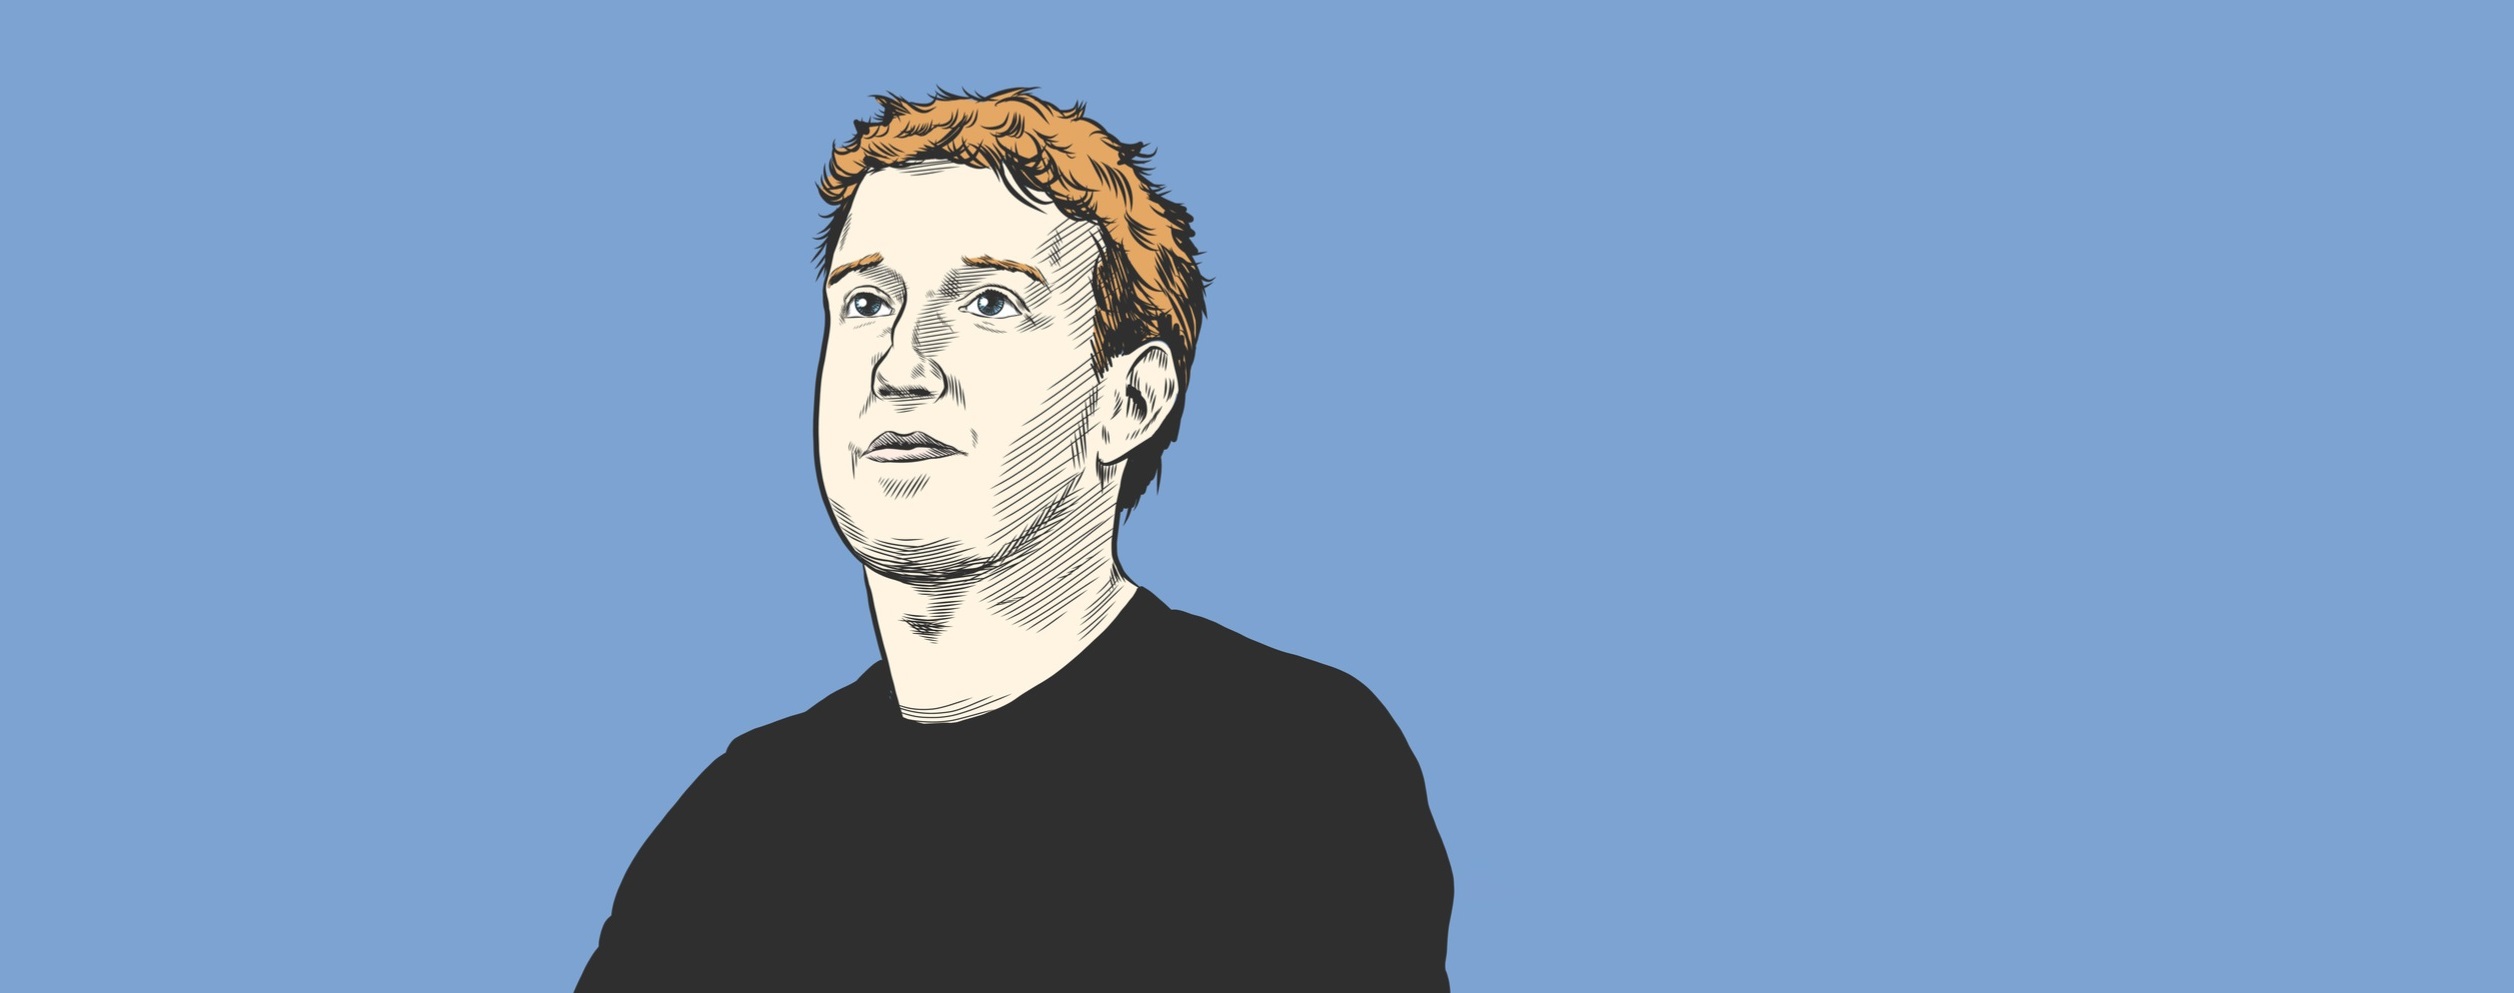 HE VOWED TO MAKE FACEBOOK BETTER. HAS THE NEED FOR PROFIT MADE IT MUCH, MUCH WORSE?